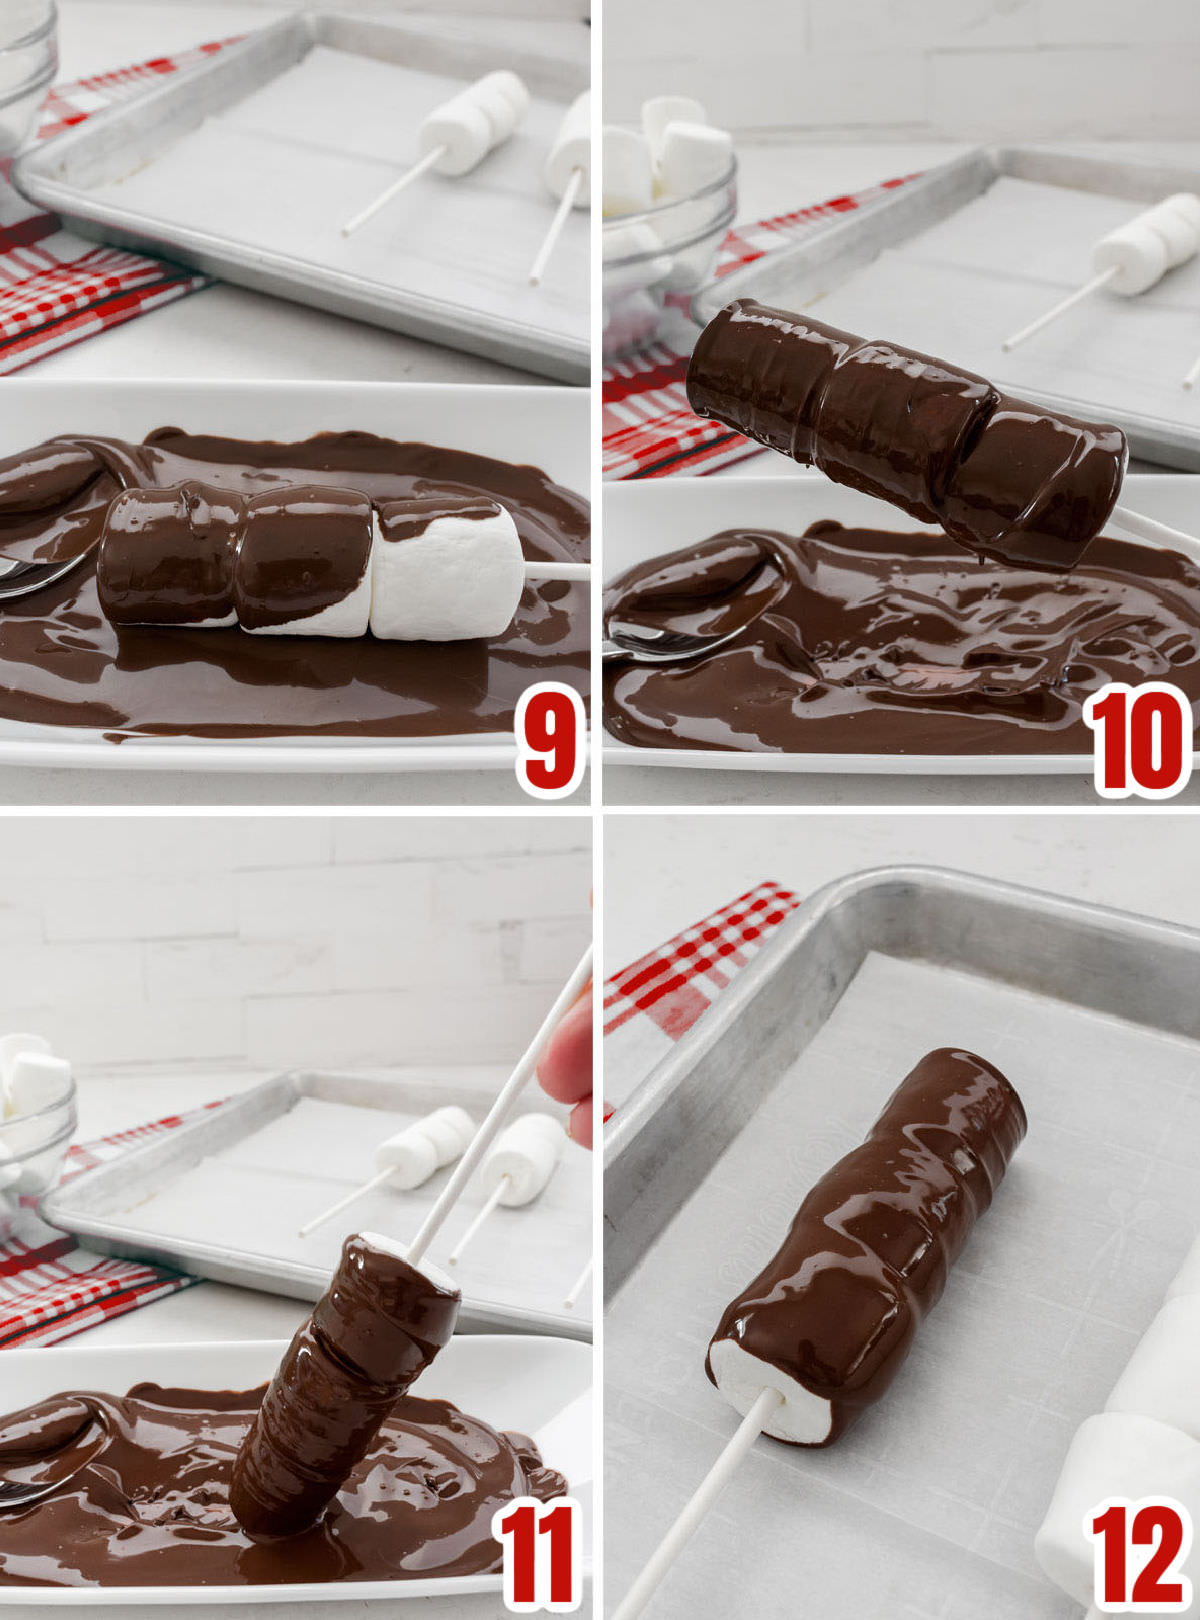 Collage image showing how to cover the Marshmallow Pop in chocolate.